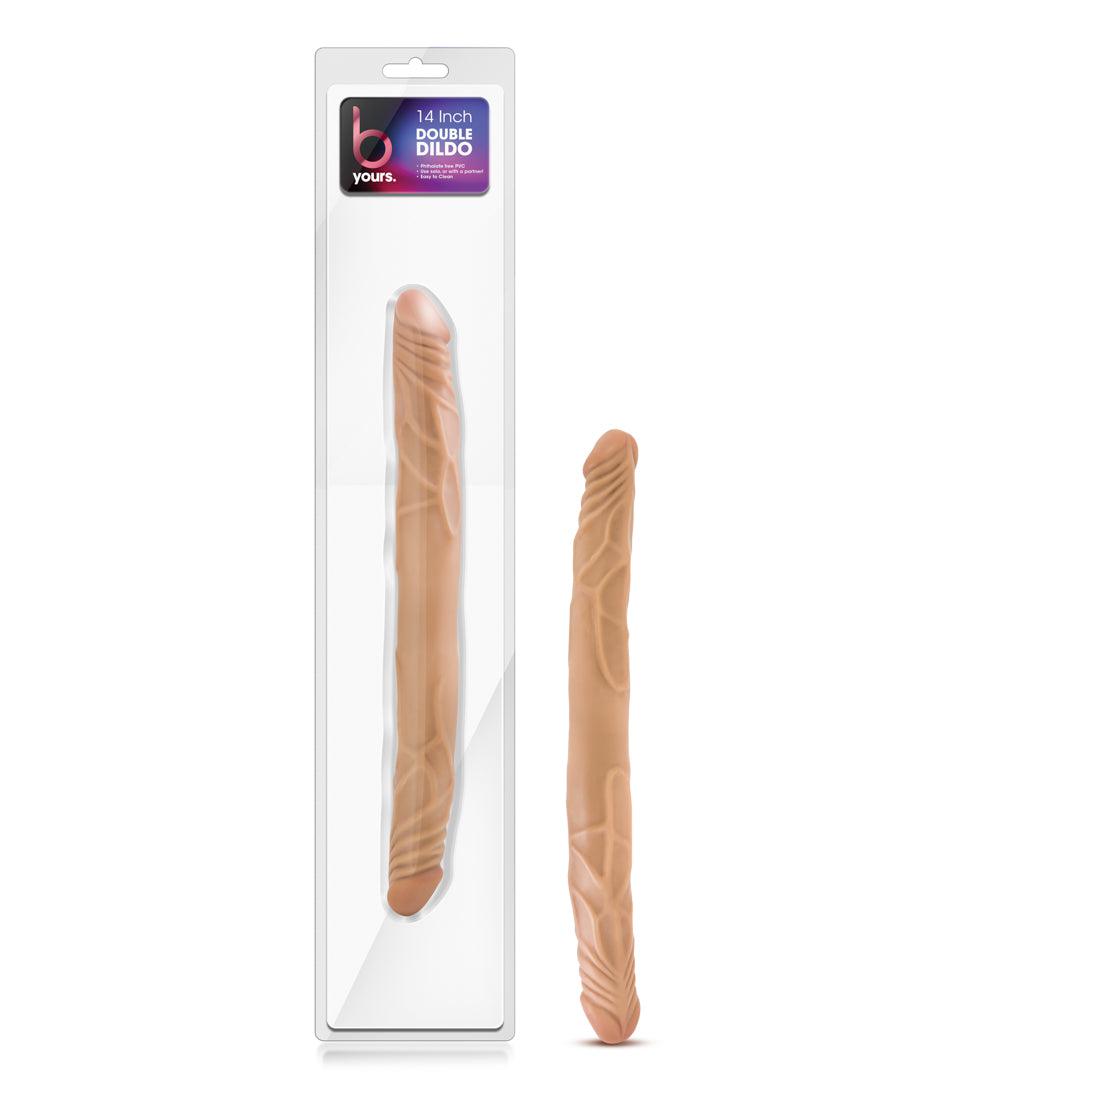 B Yours 14 Inch Double Dildo - Latin